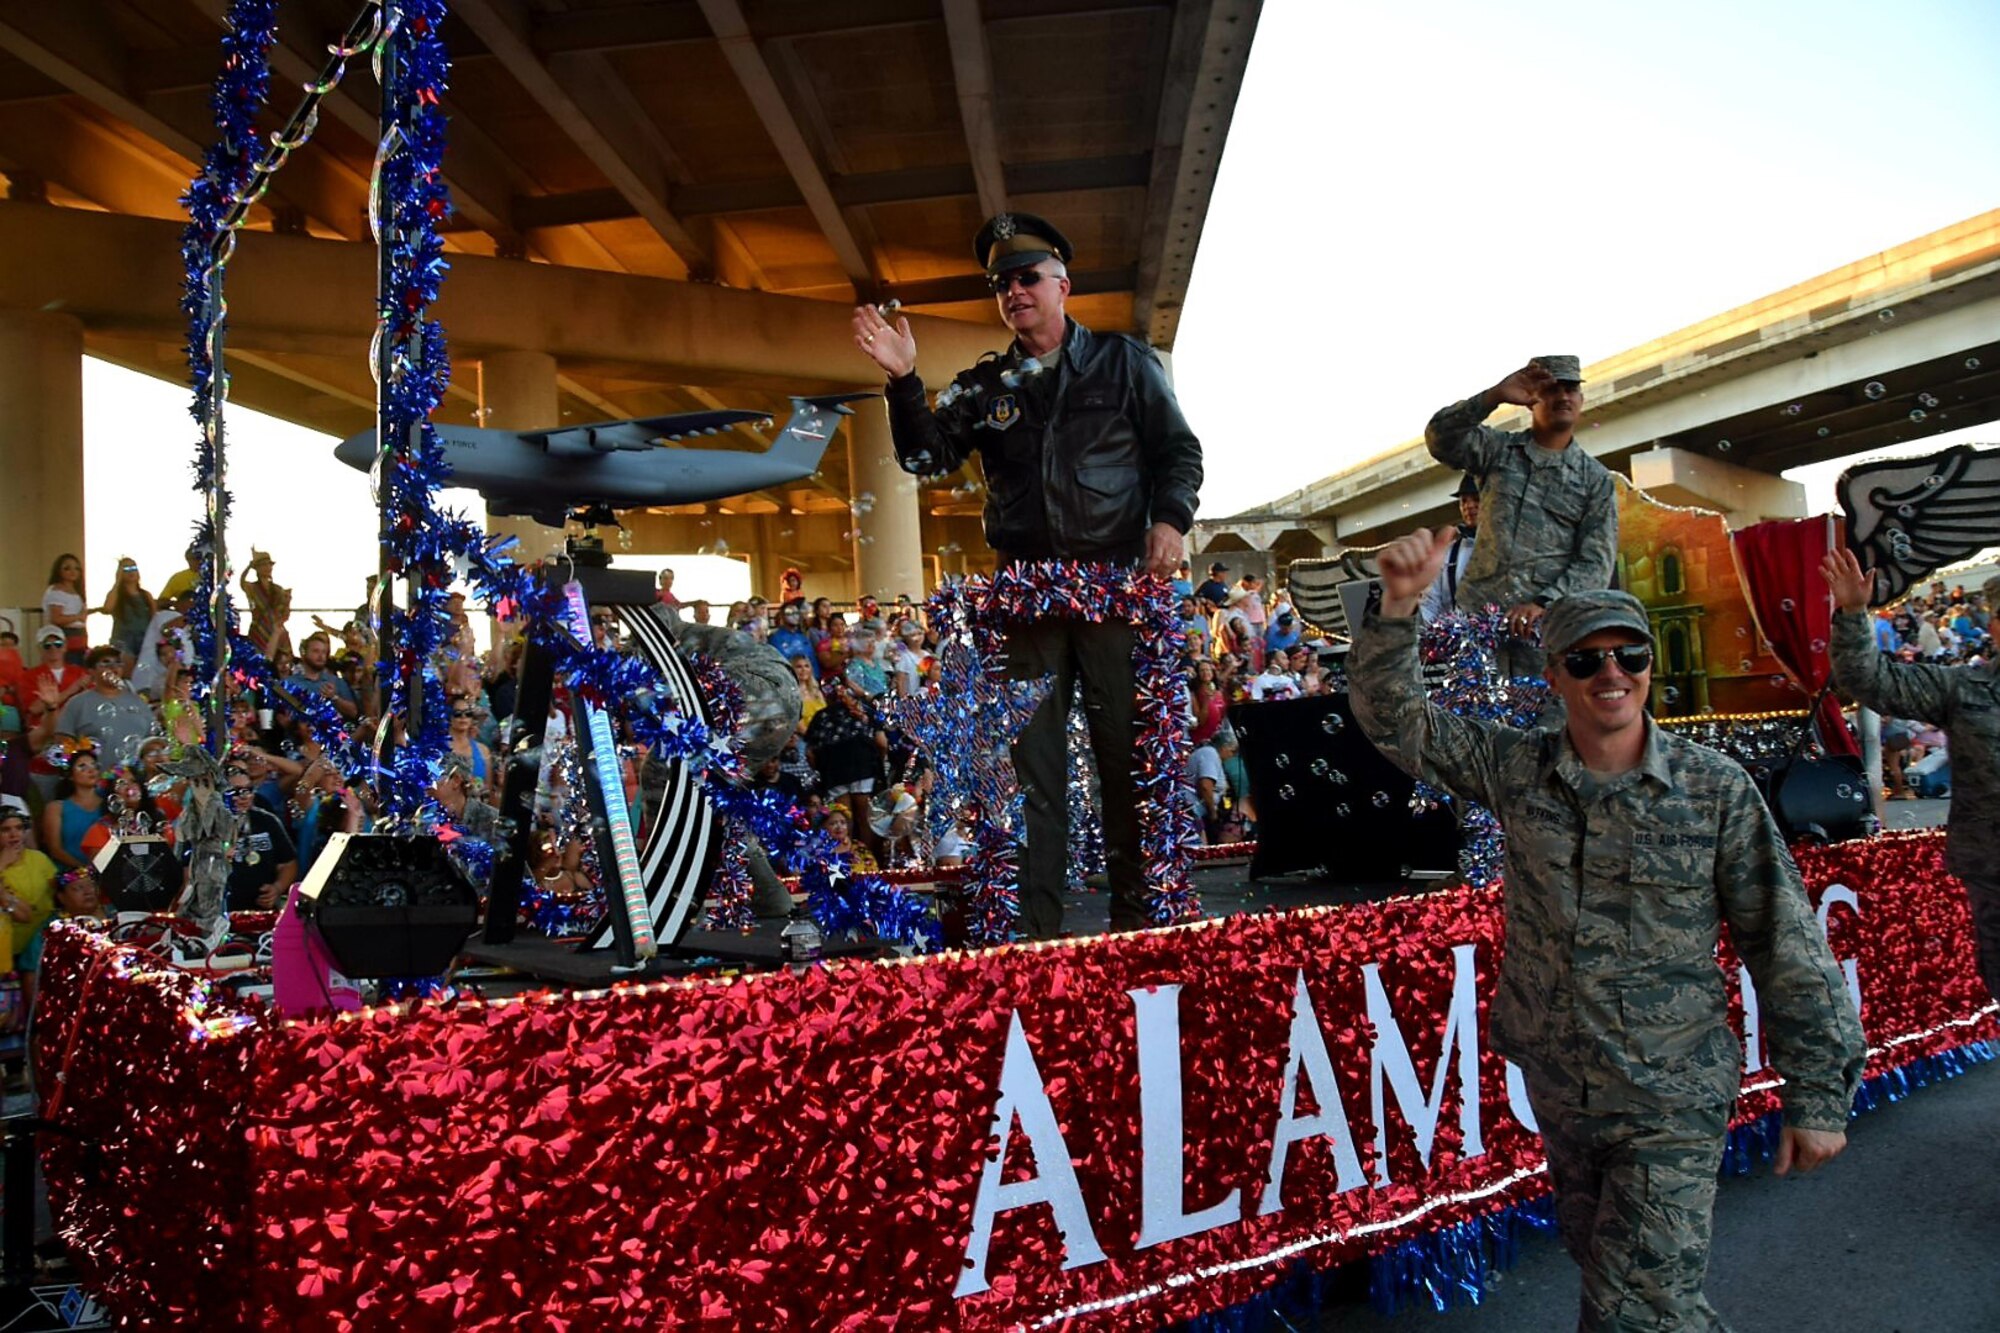 Col. David A. Scott, 433rd Airlift Wing vice commander, waves to the crowd during the 71st annual Fiesta Flambeau Parade, April 27, 2019.